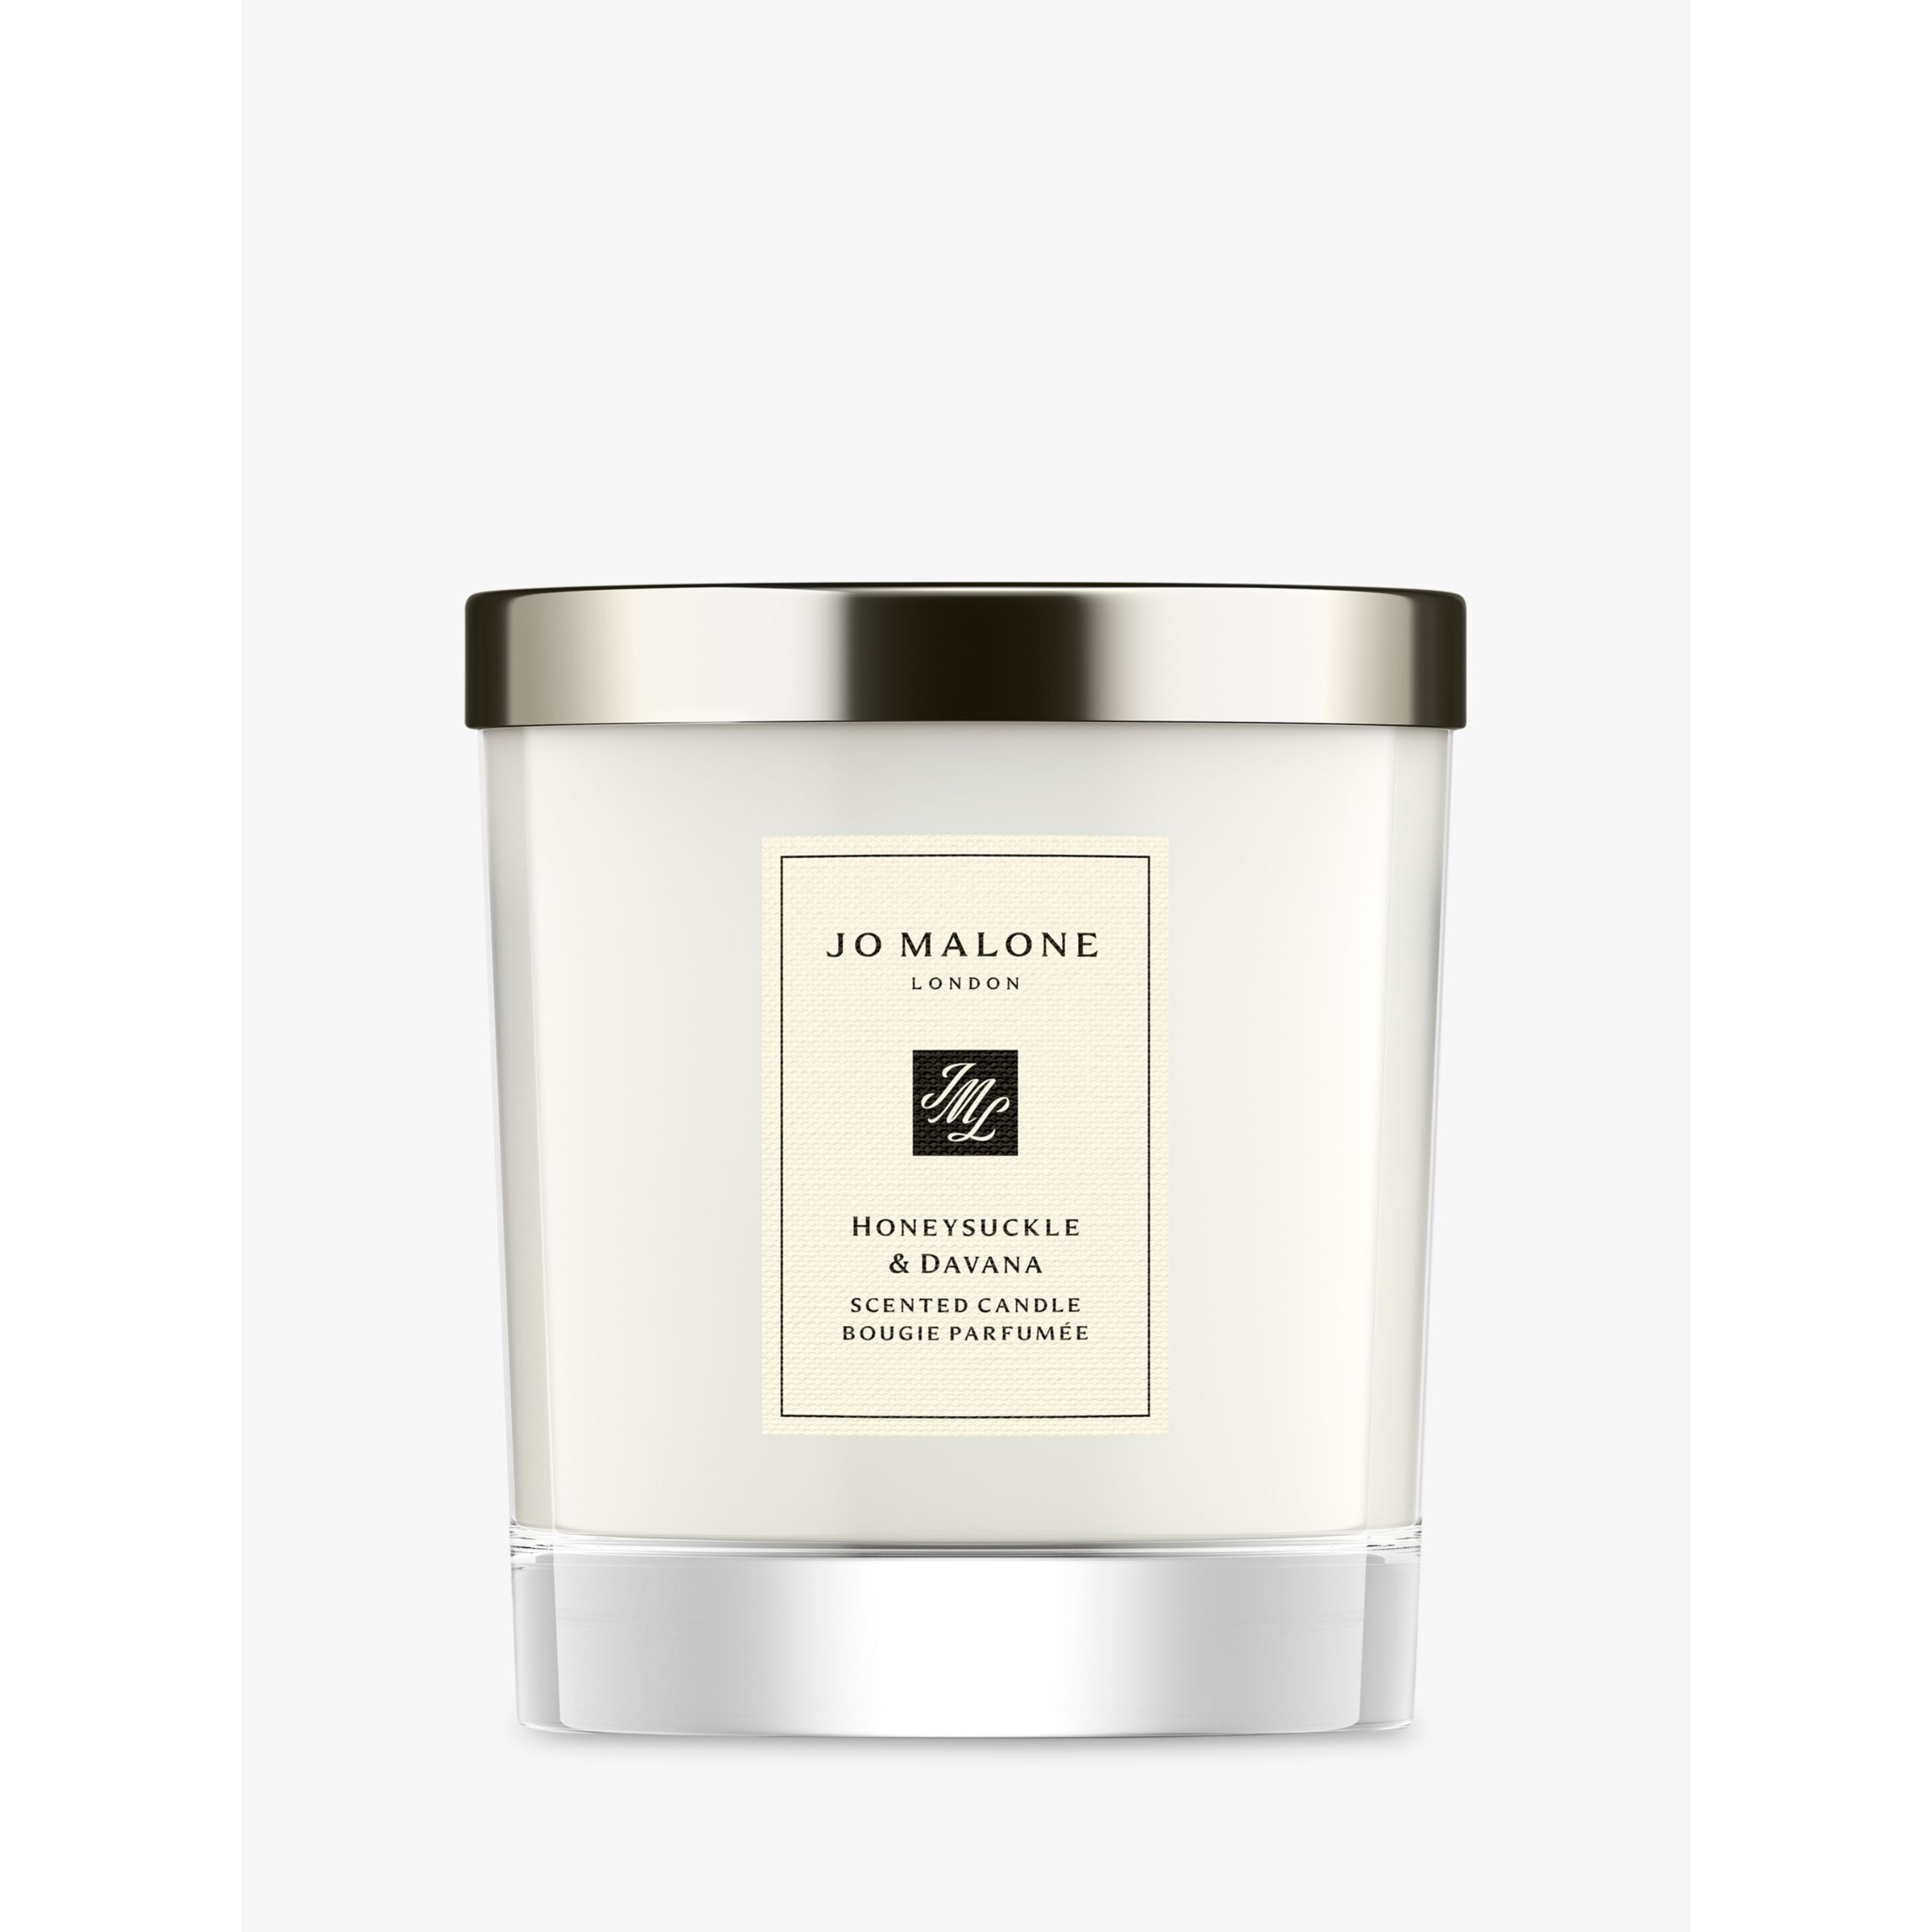 Jo Malone London Honeysuckle and Davana Scented Home Candle, 200g - image 1